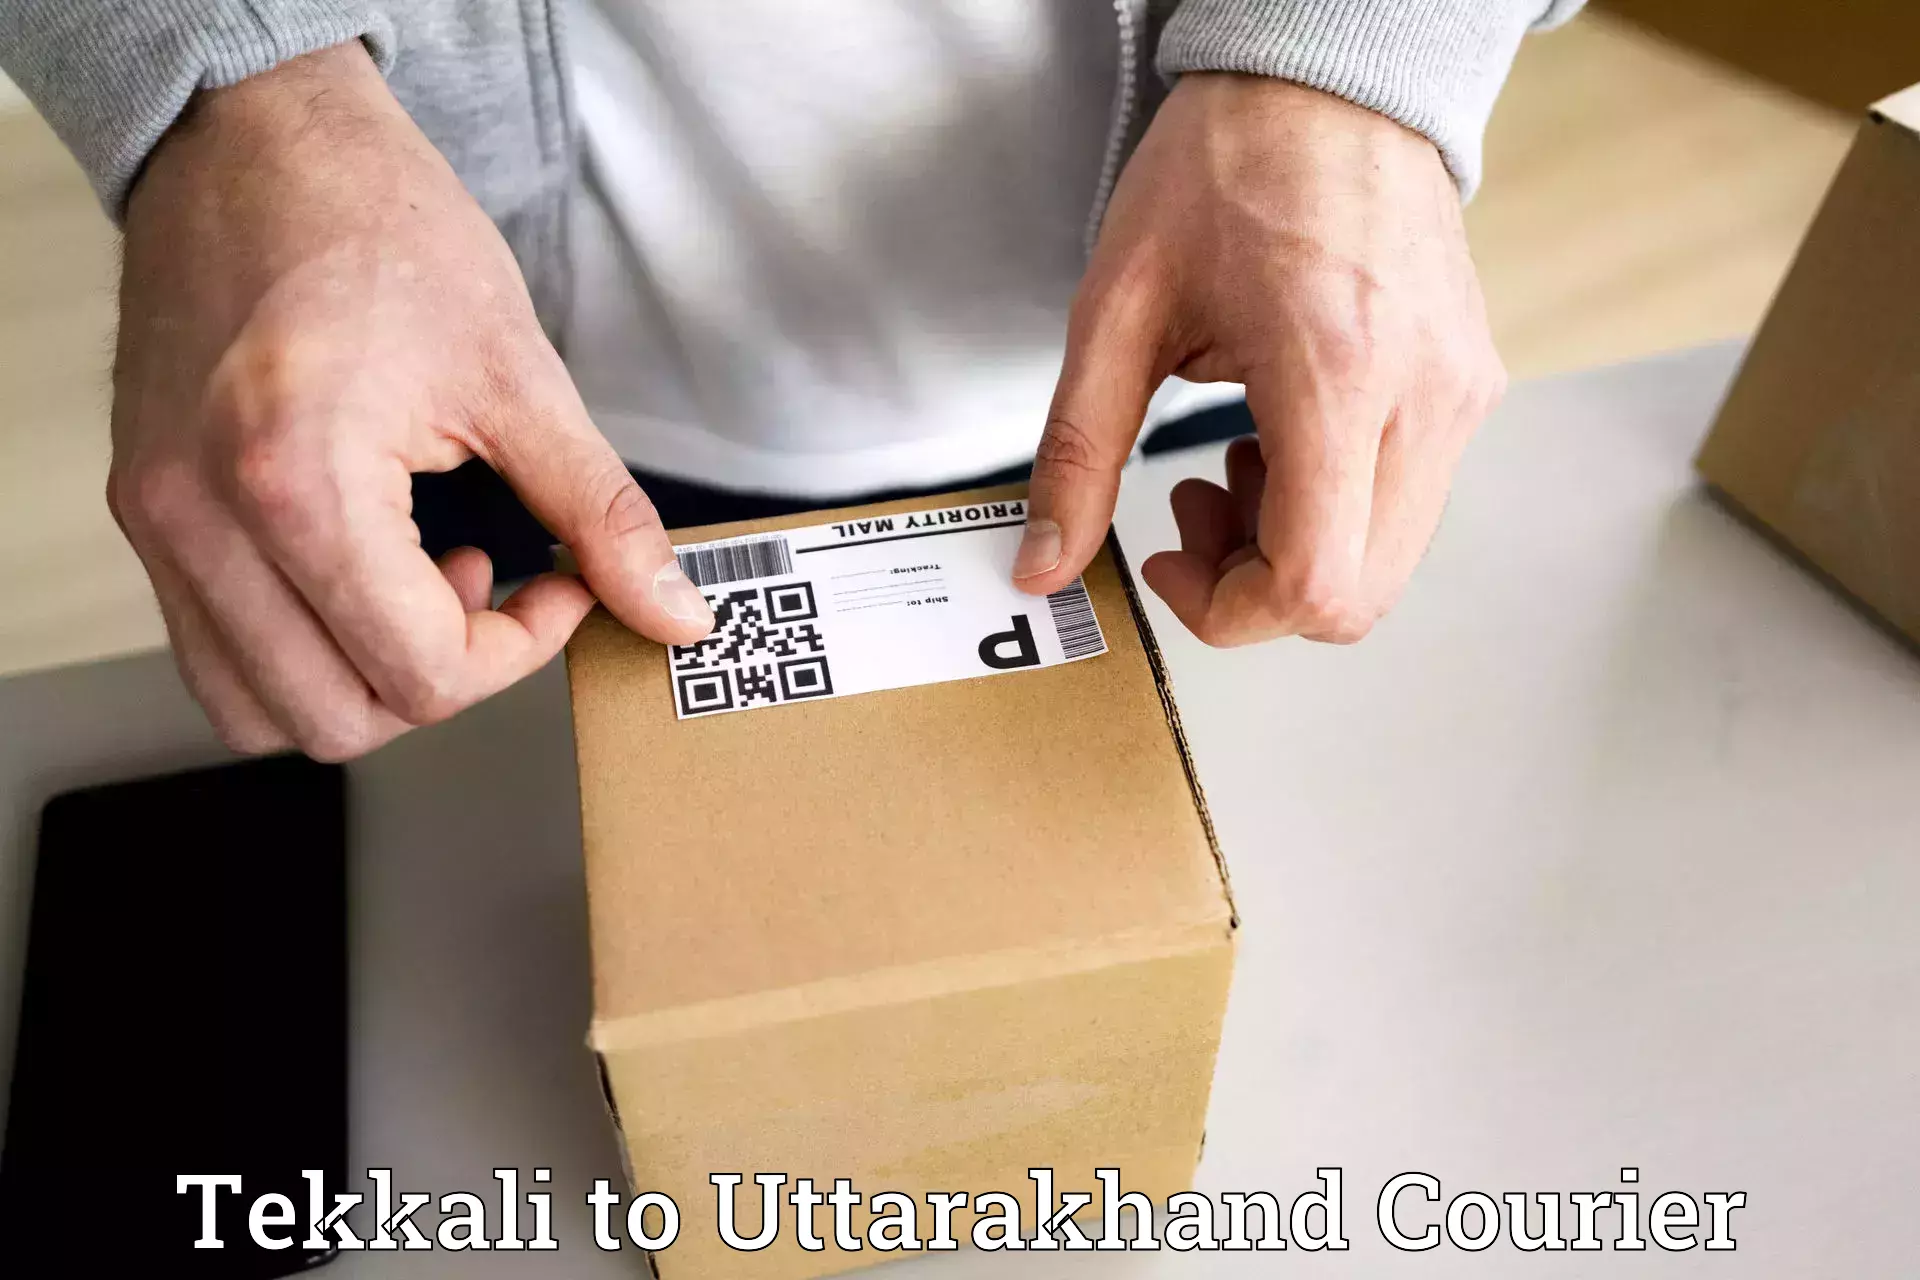 Overnight delivery services Tekkali to Haridwar